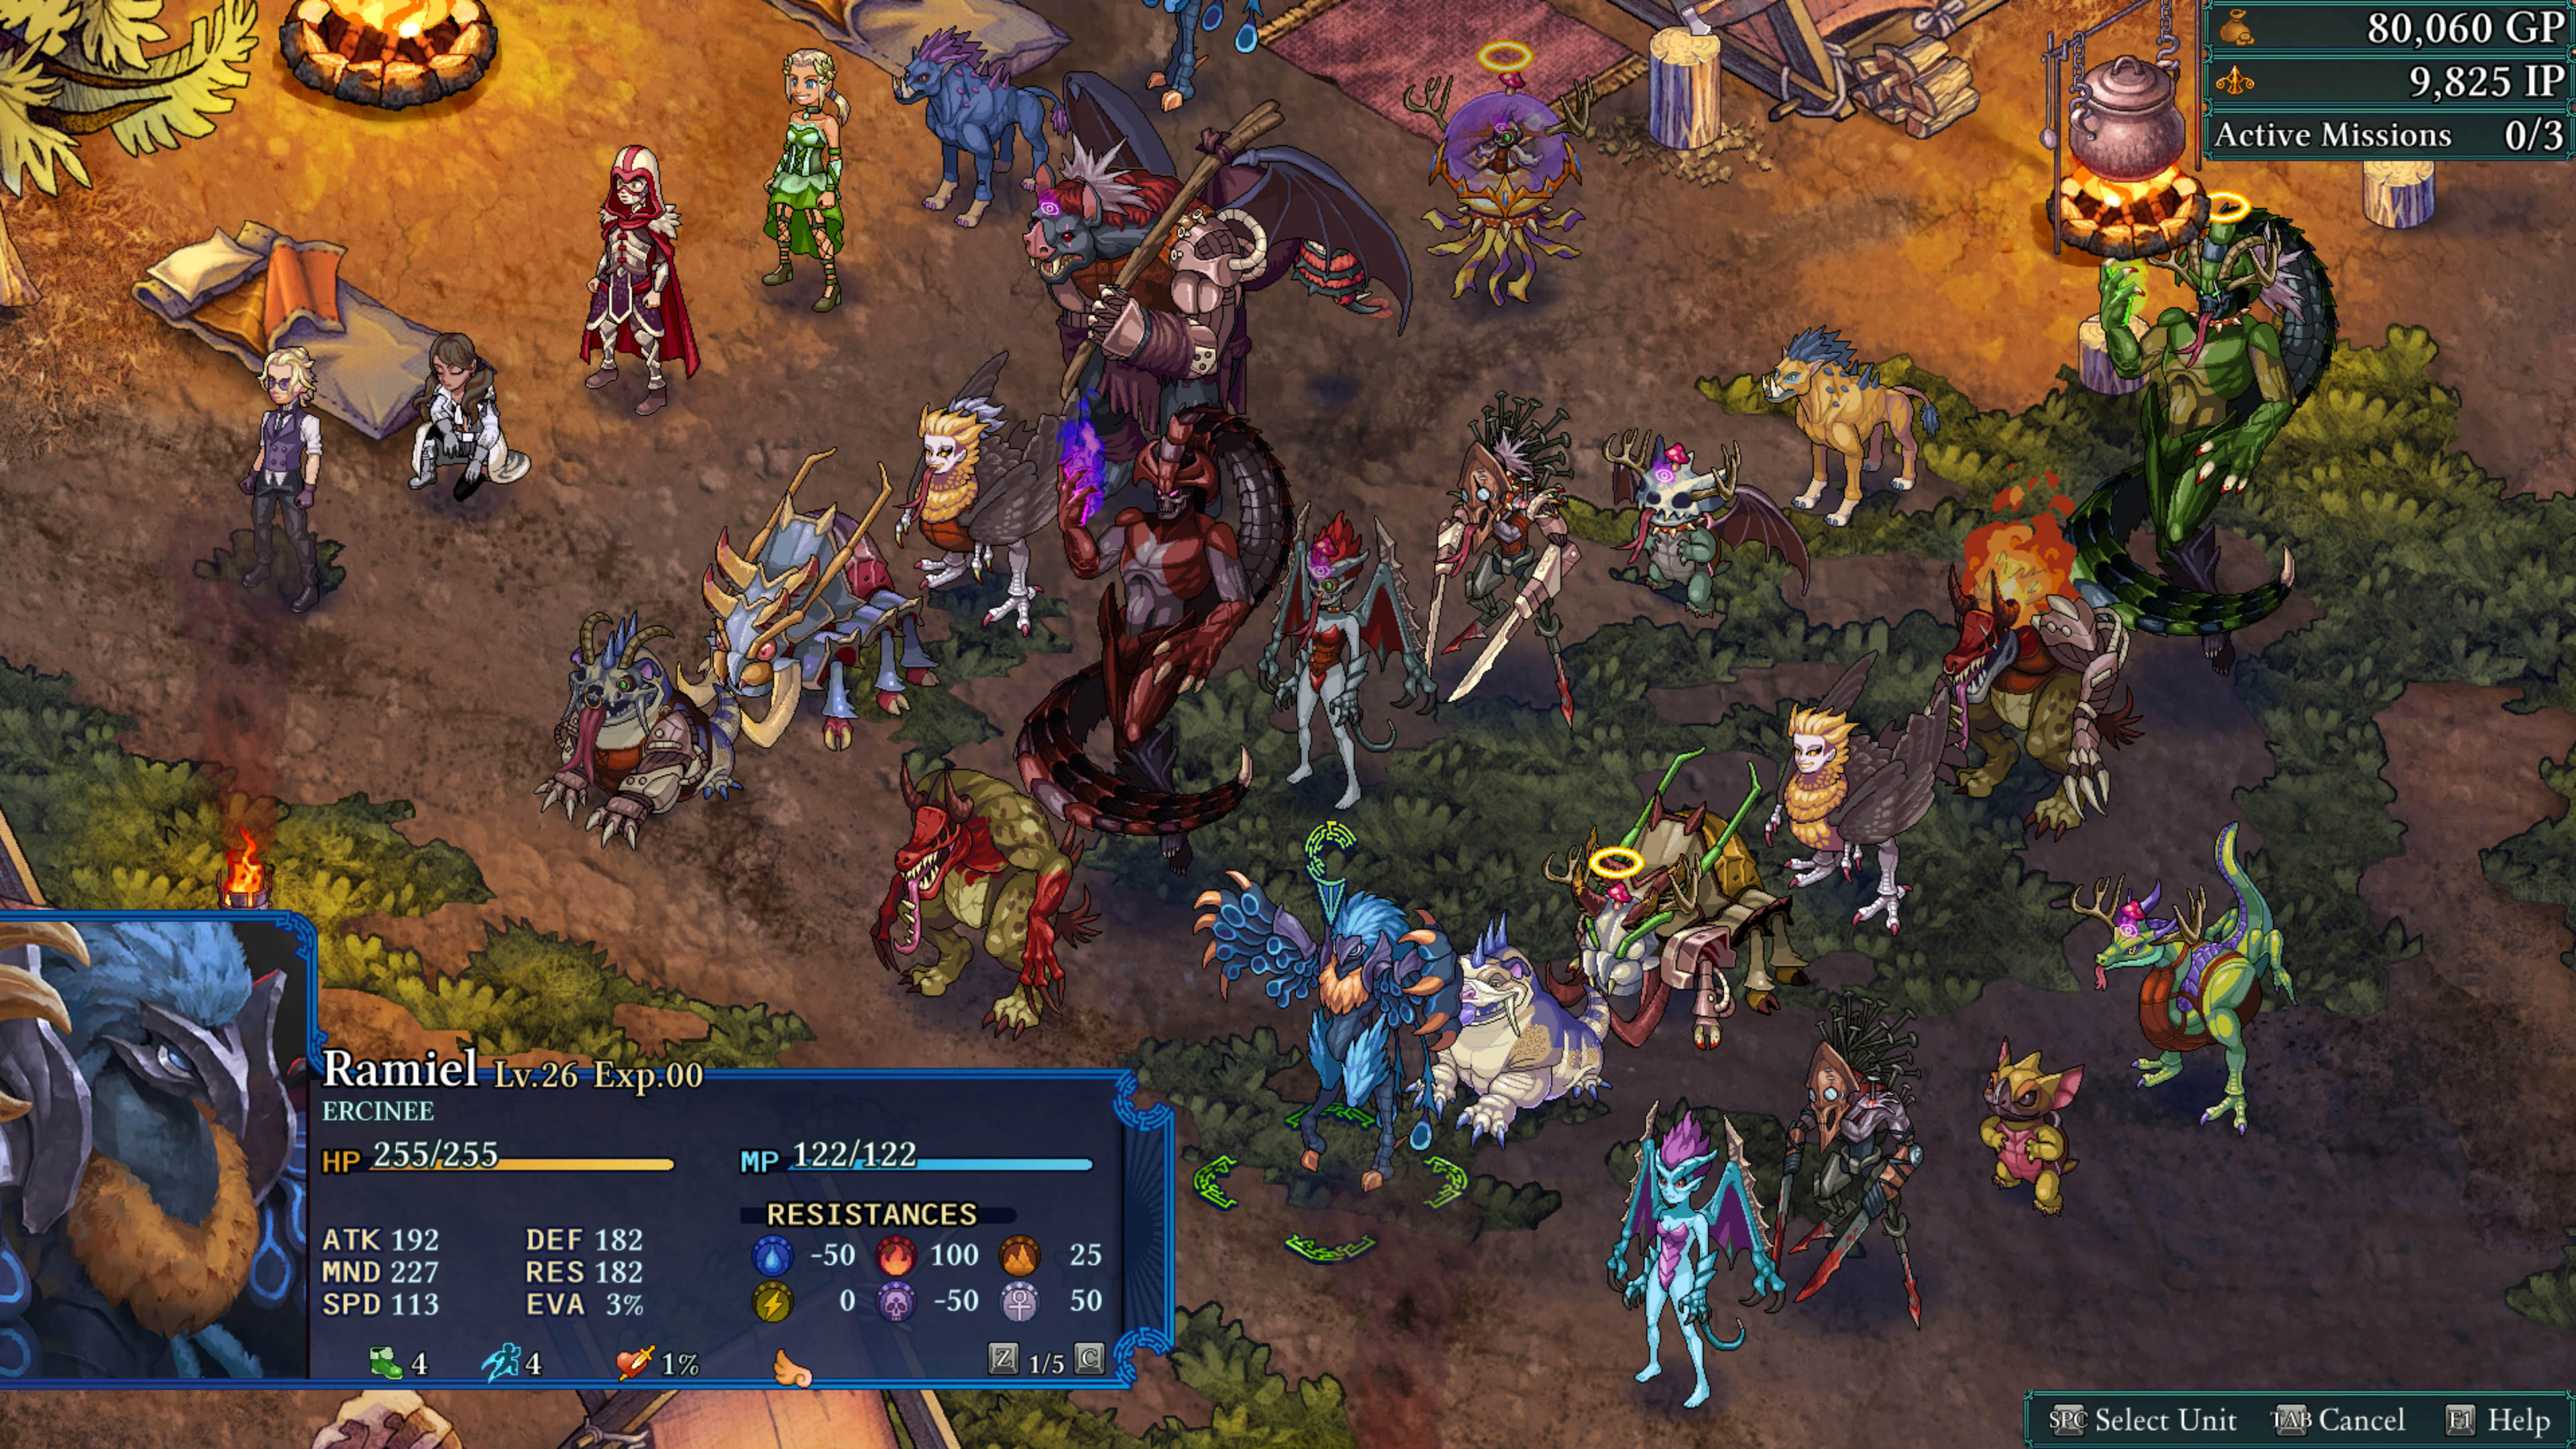  Tactical RPG Fell Seal launches its first expansion, Missions and Monsters 